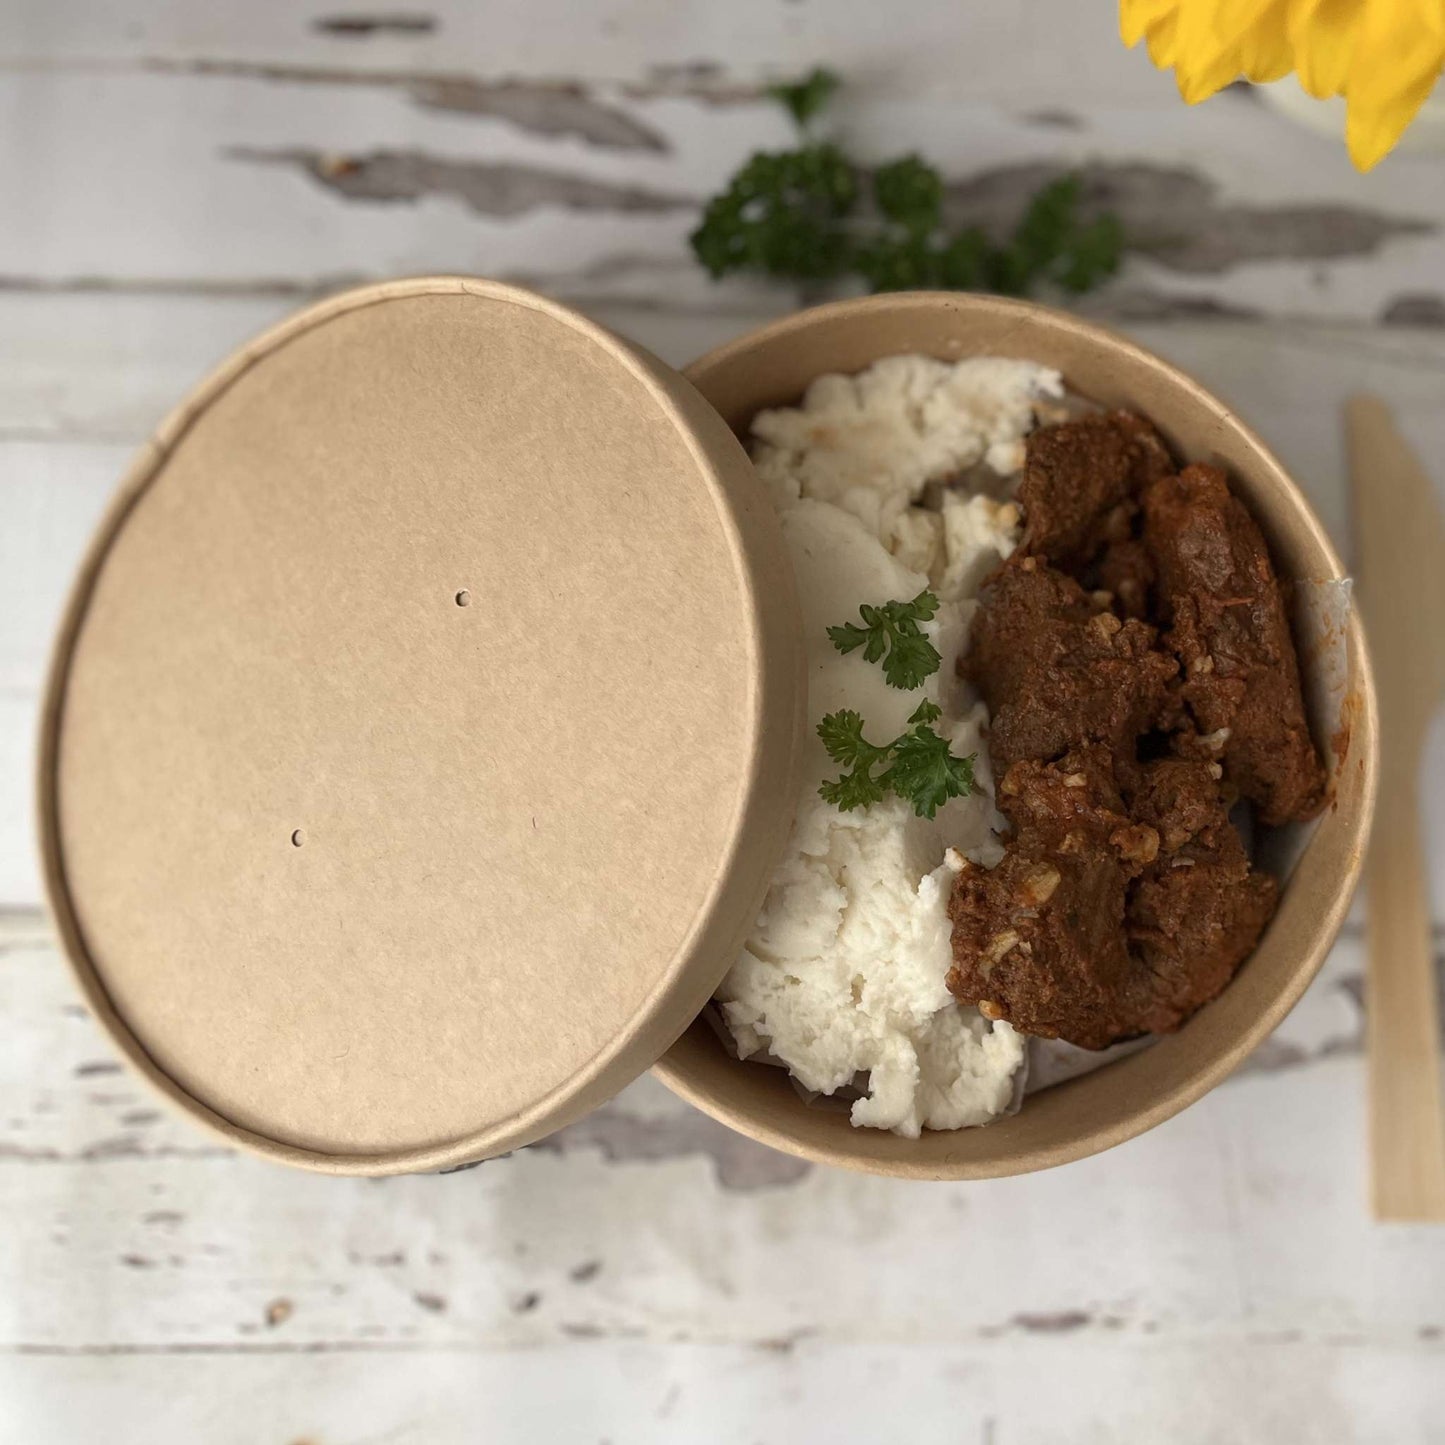 1100 ml Biodegradable Kraft Paper Shallow Salad Container